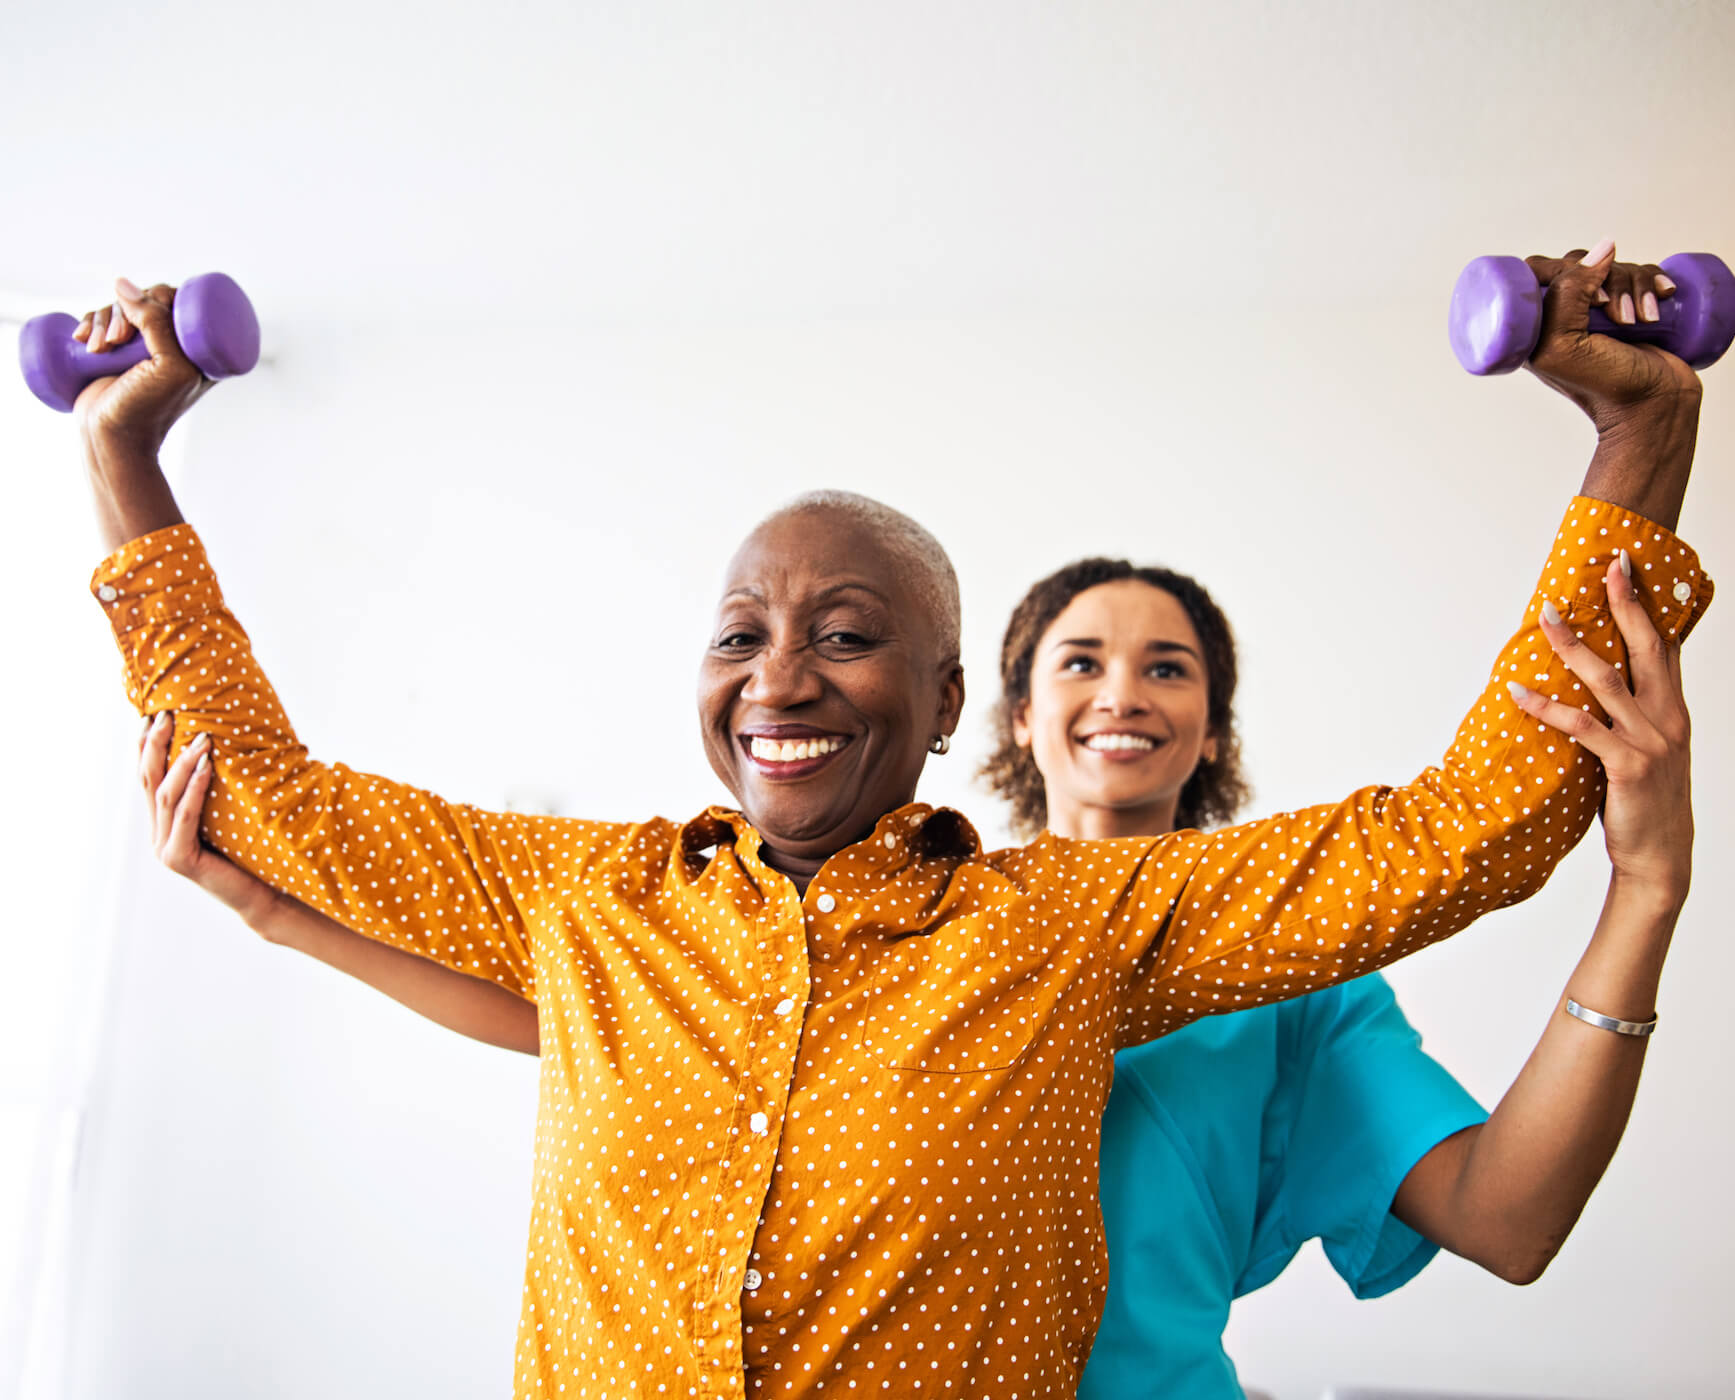 Female medical professional helping senior woman lift weights